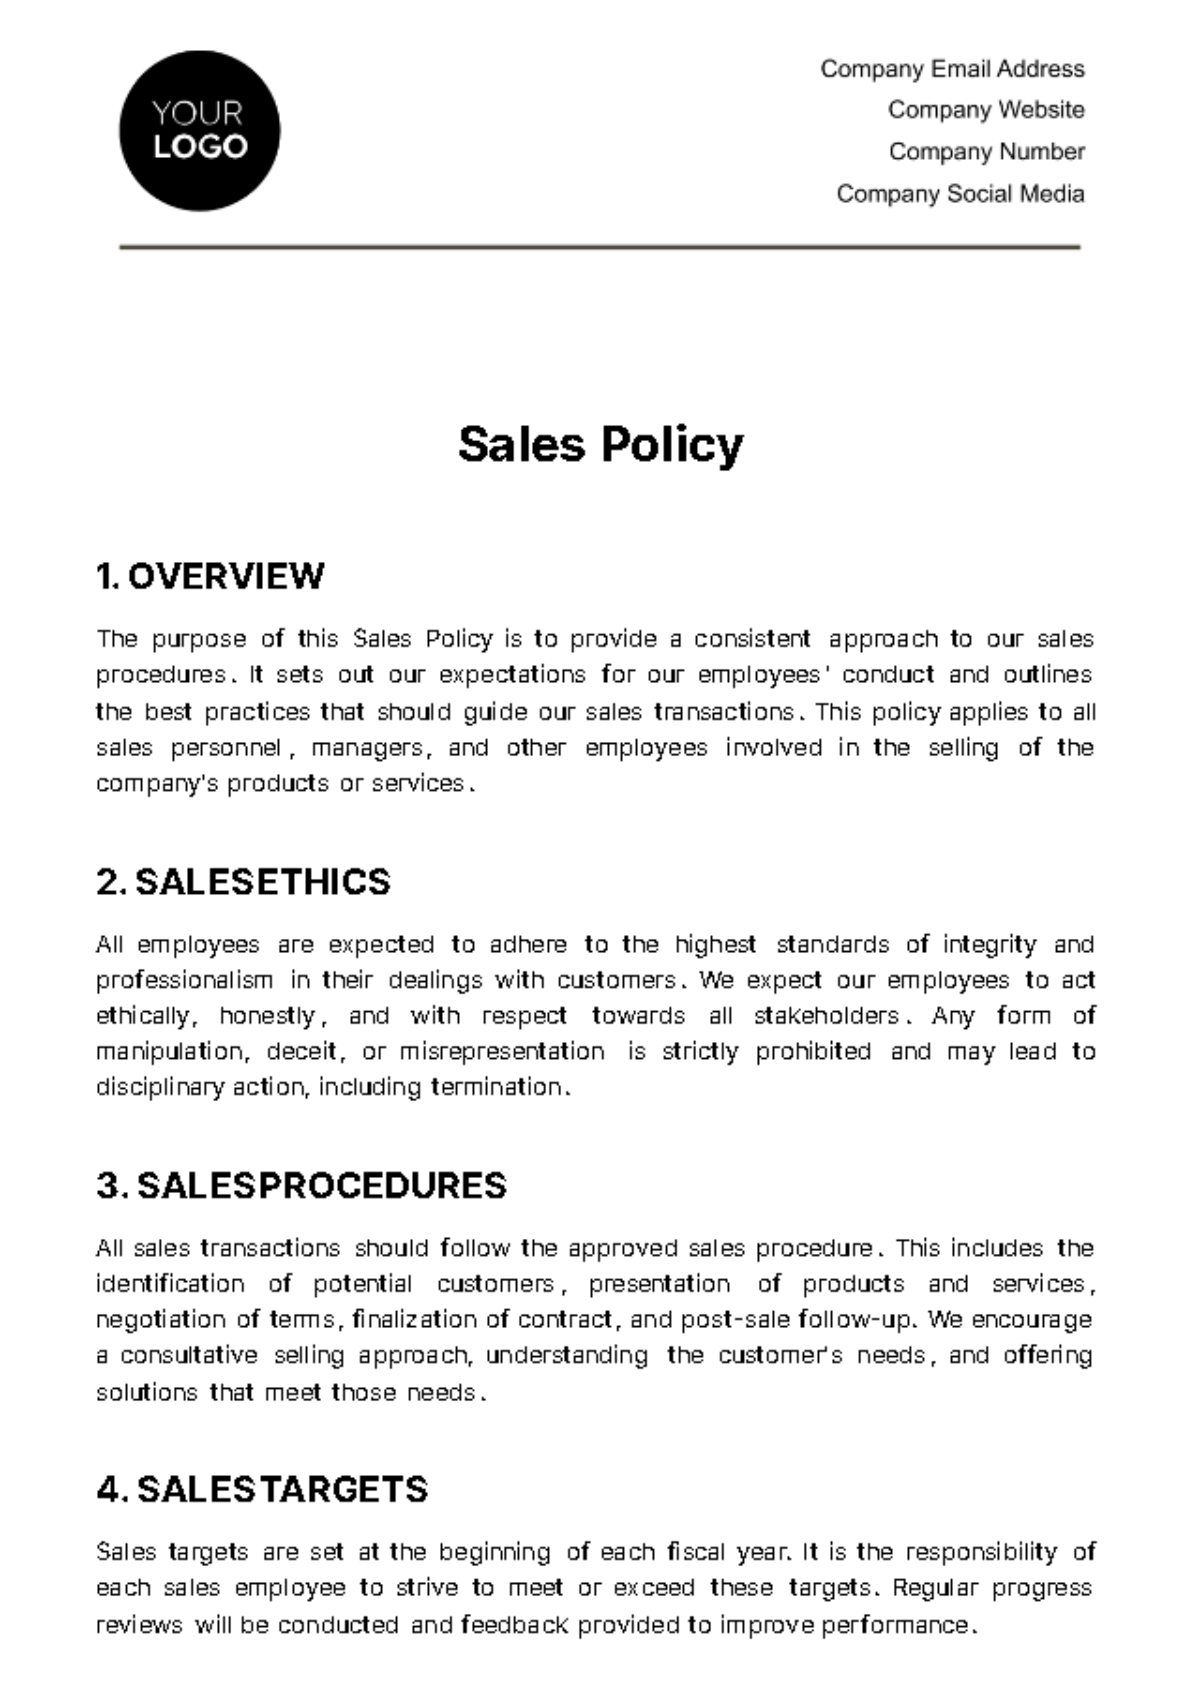 Free Sales Policy Template